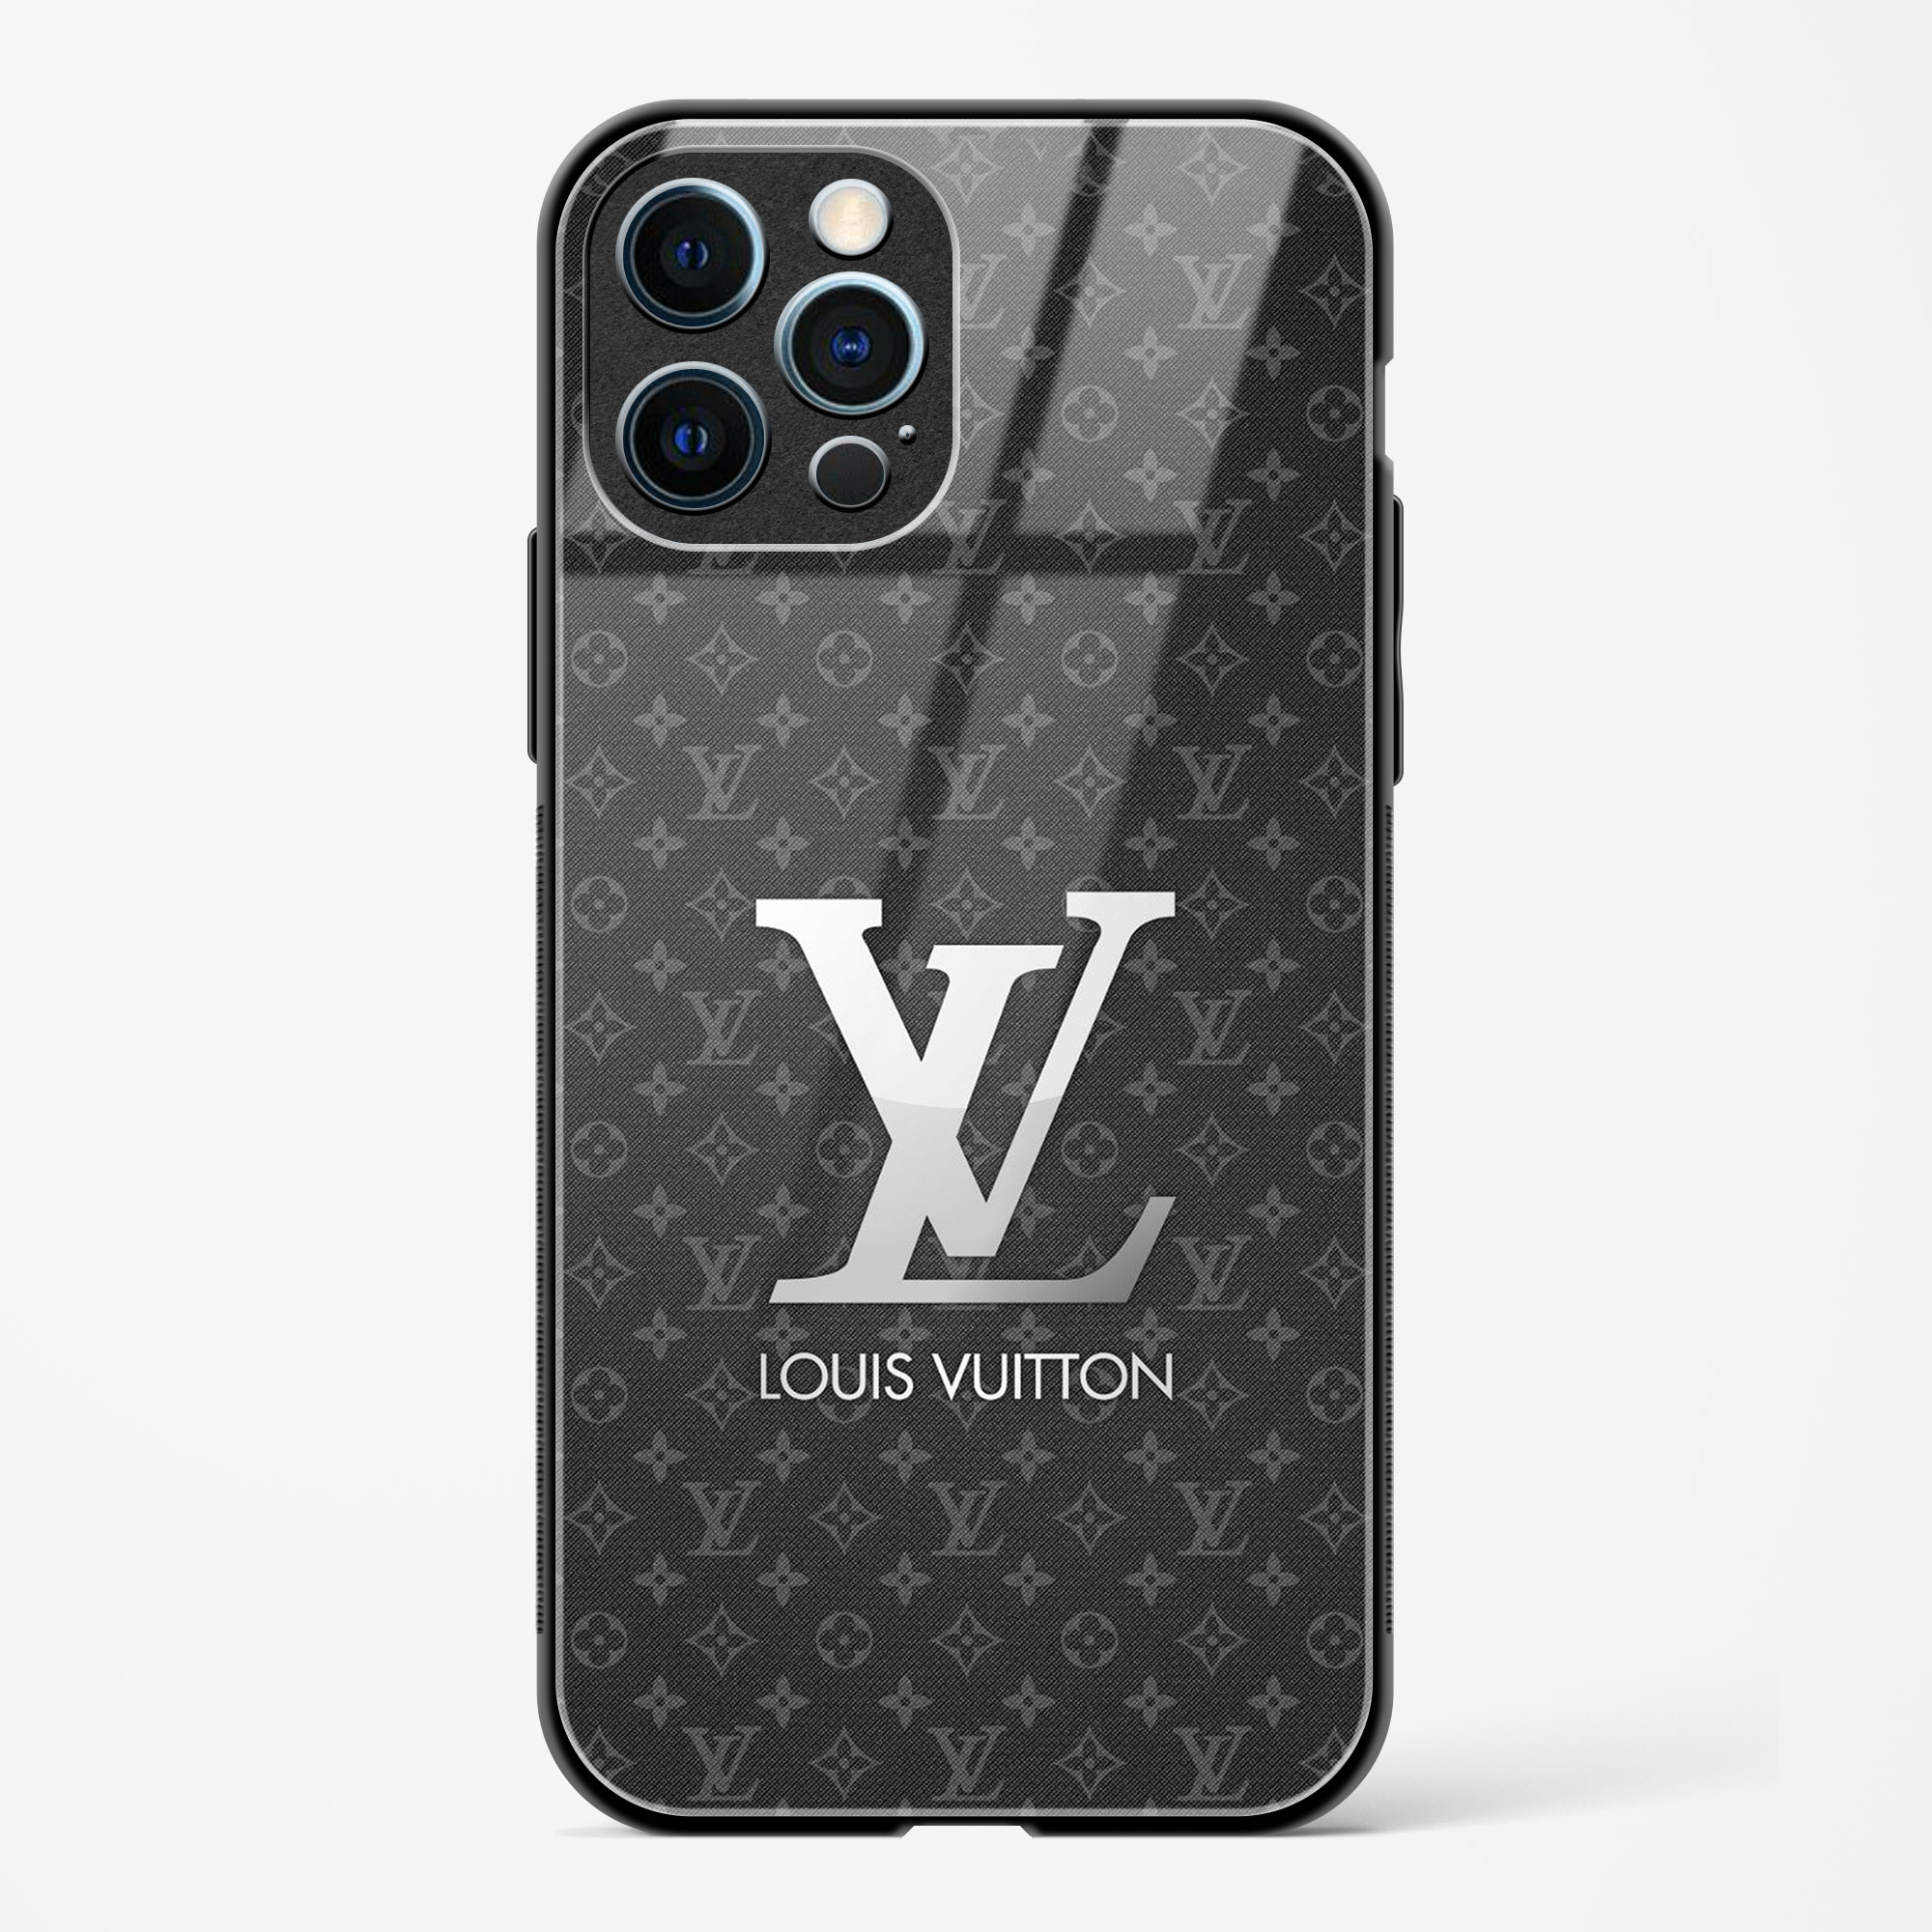 louis vuitton cell phone case iphone 12 pro max